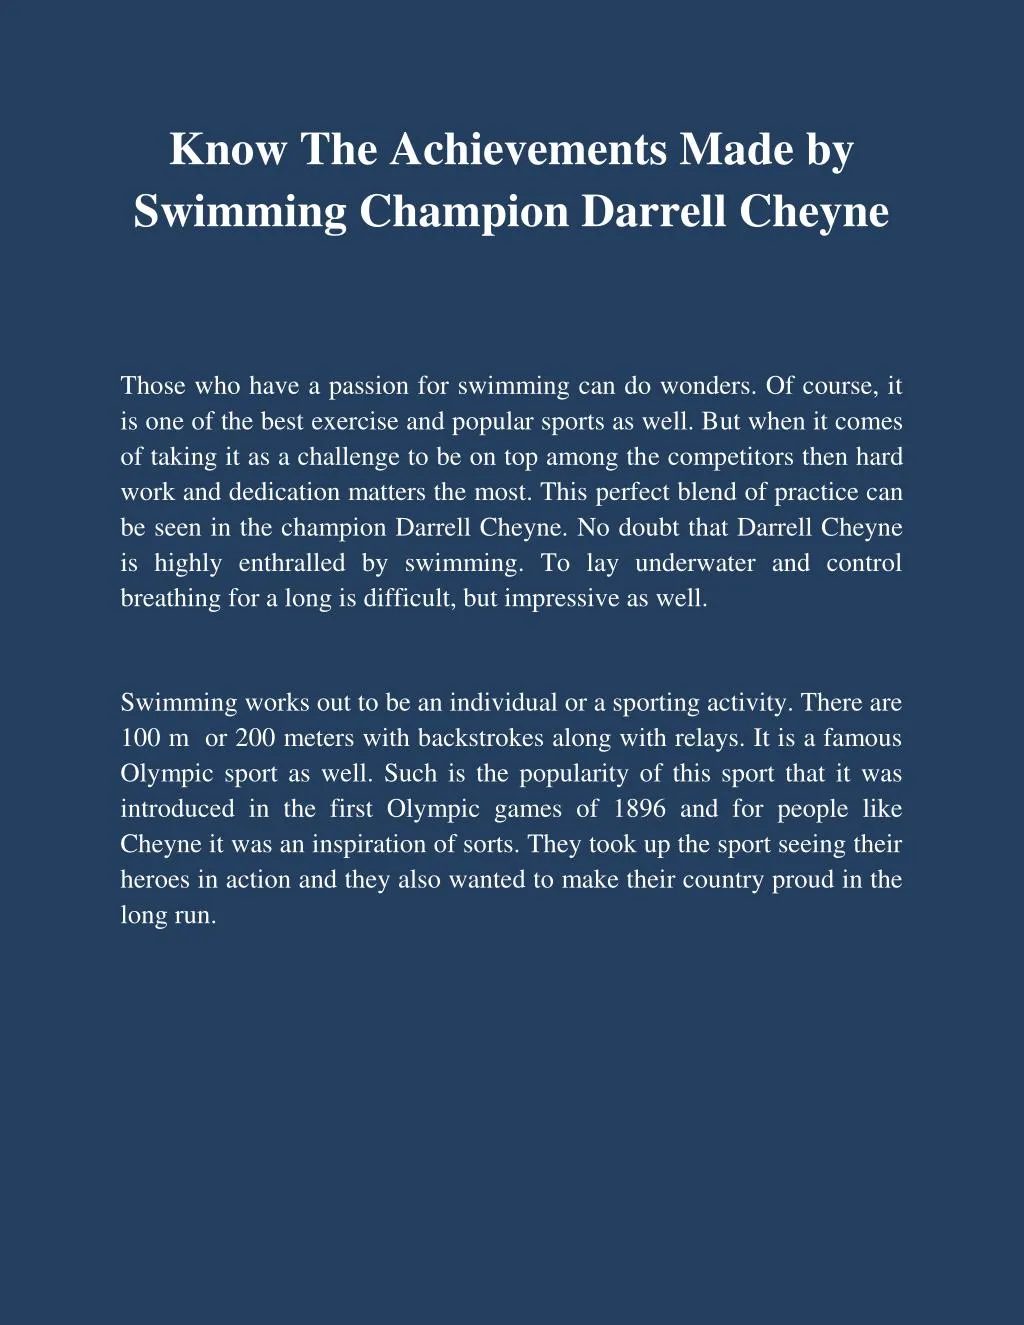 know the achievements made by swimming champion